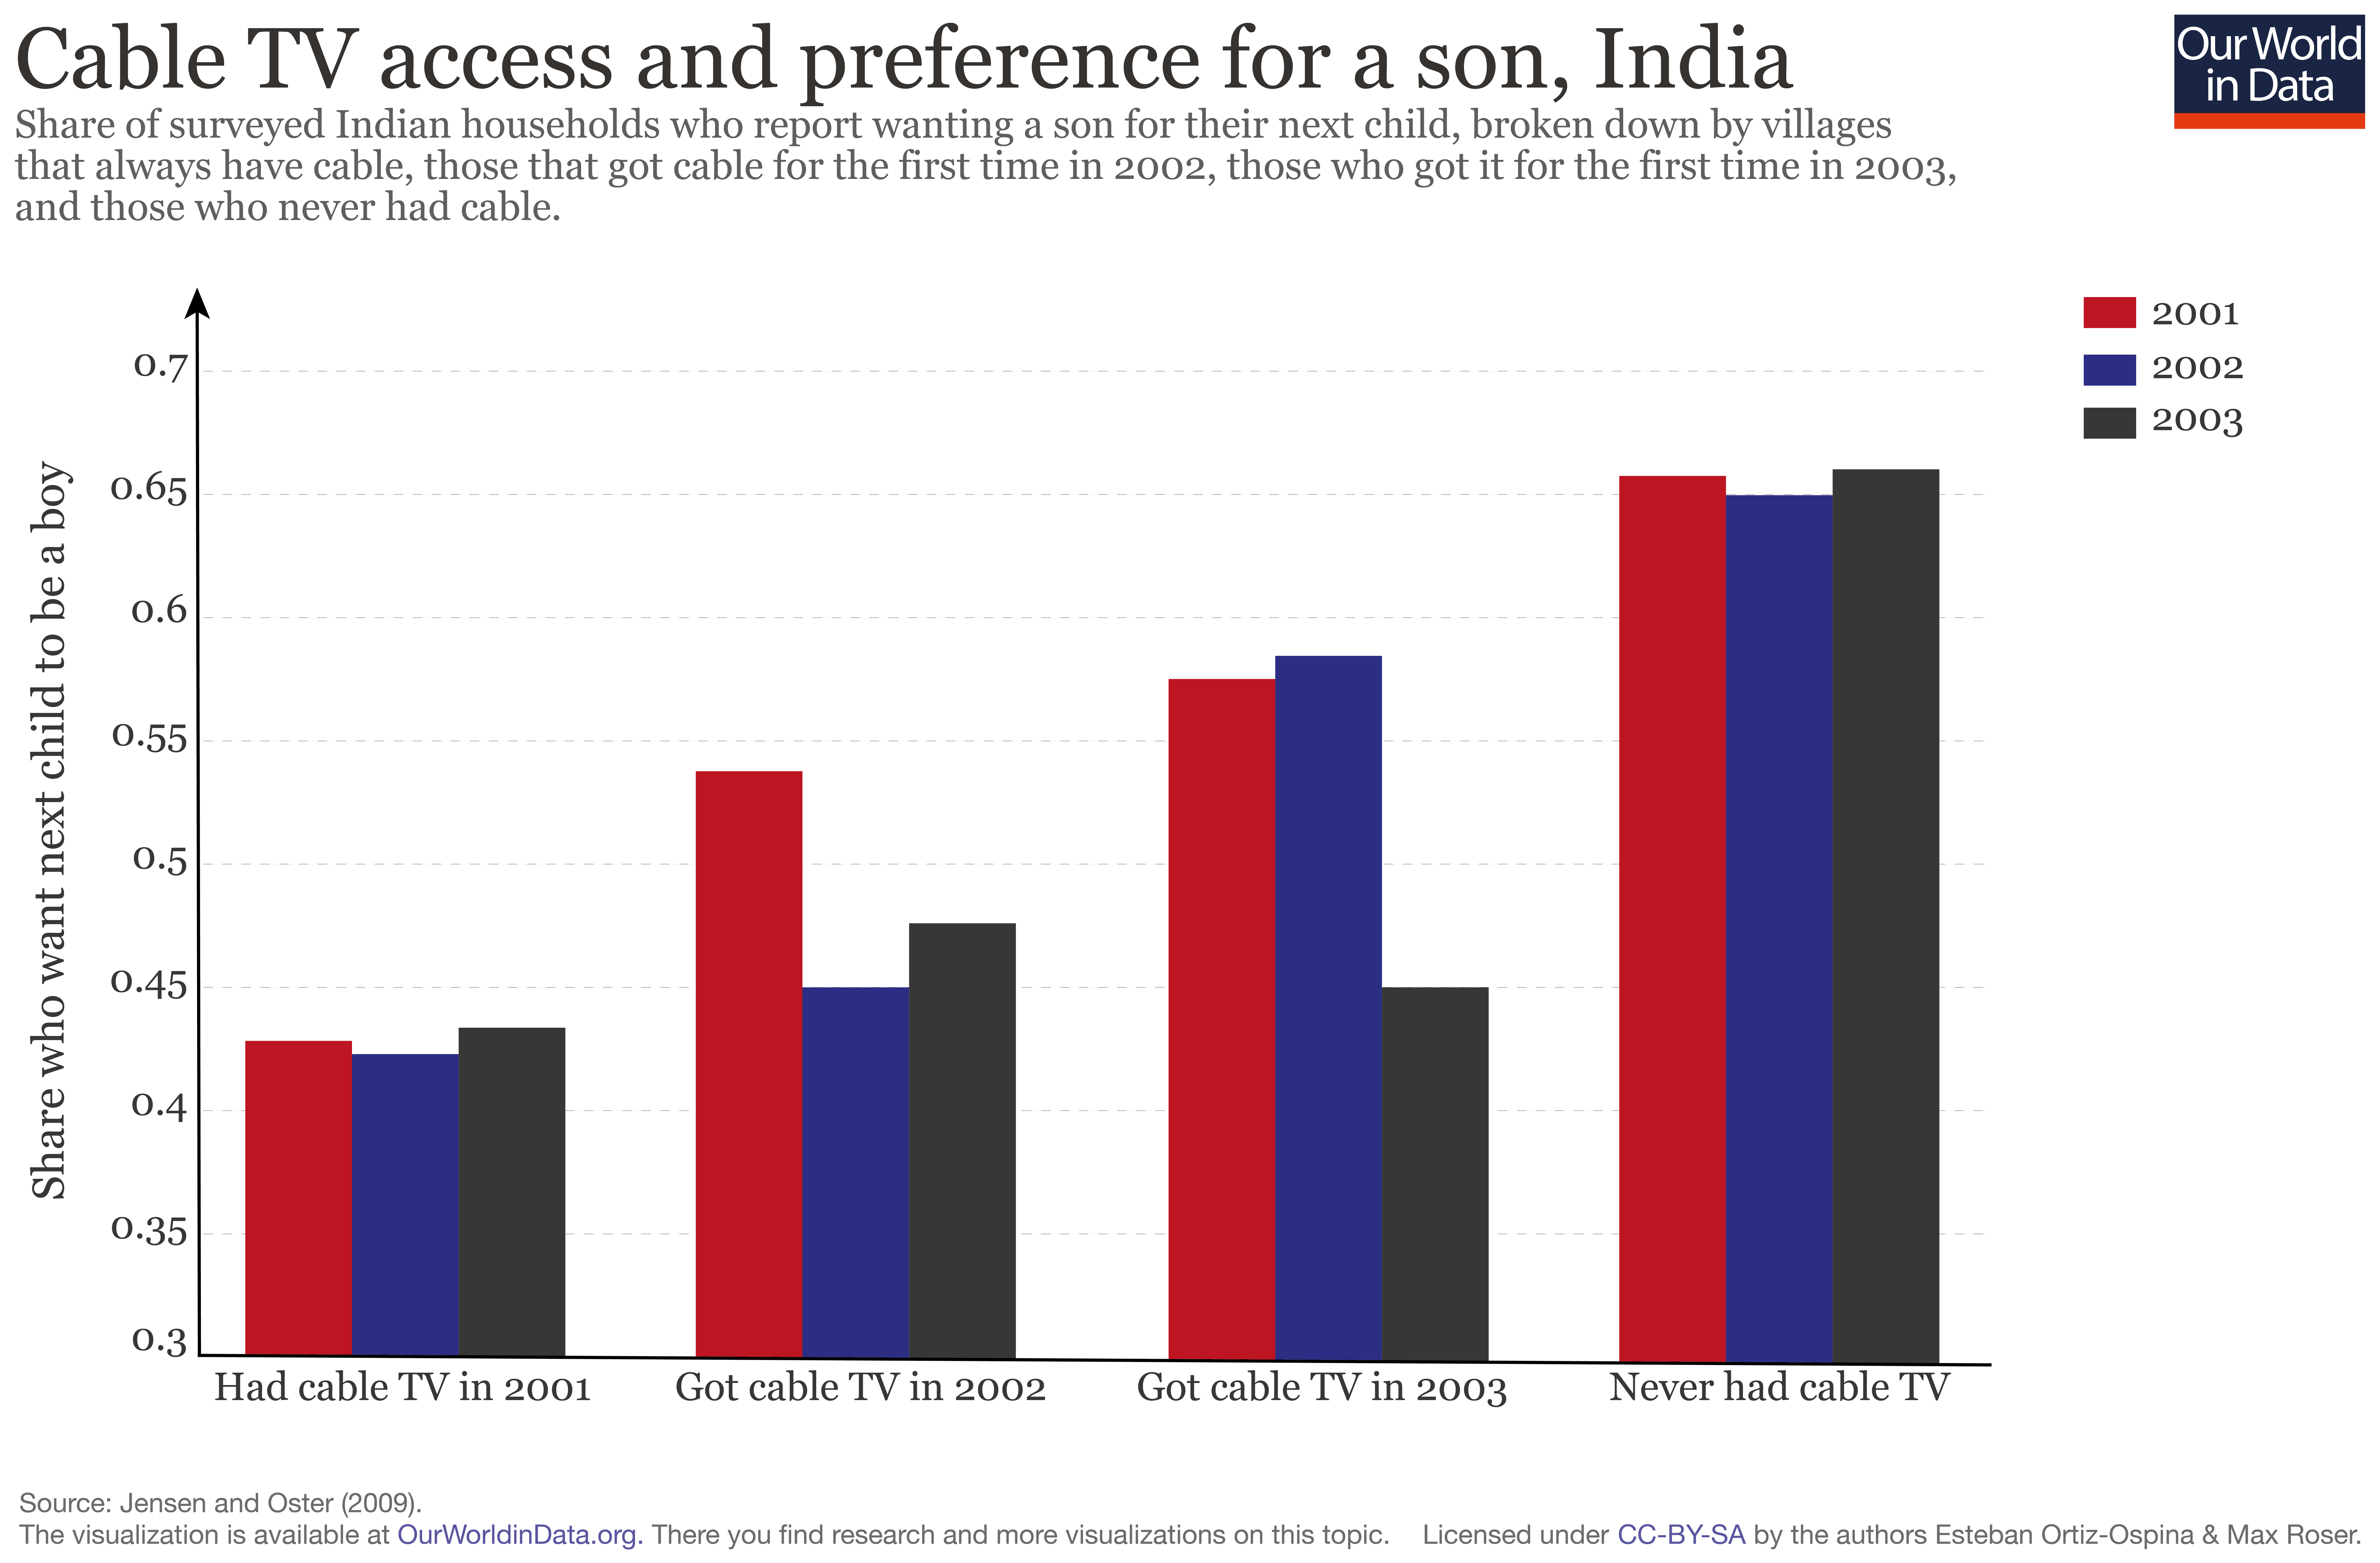 Bar chart of the share of Indian households who report wanting their next child to be a boy in 2001, 2002, and 2003, depending on whether they had cable TV in 2001, got cable TV in 2002 or 2003, or never had cable TV. The preference for a son declined for households in the year they got cable TV.